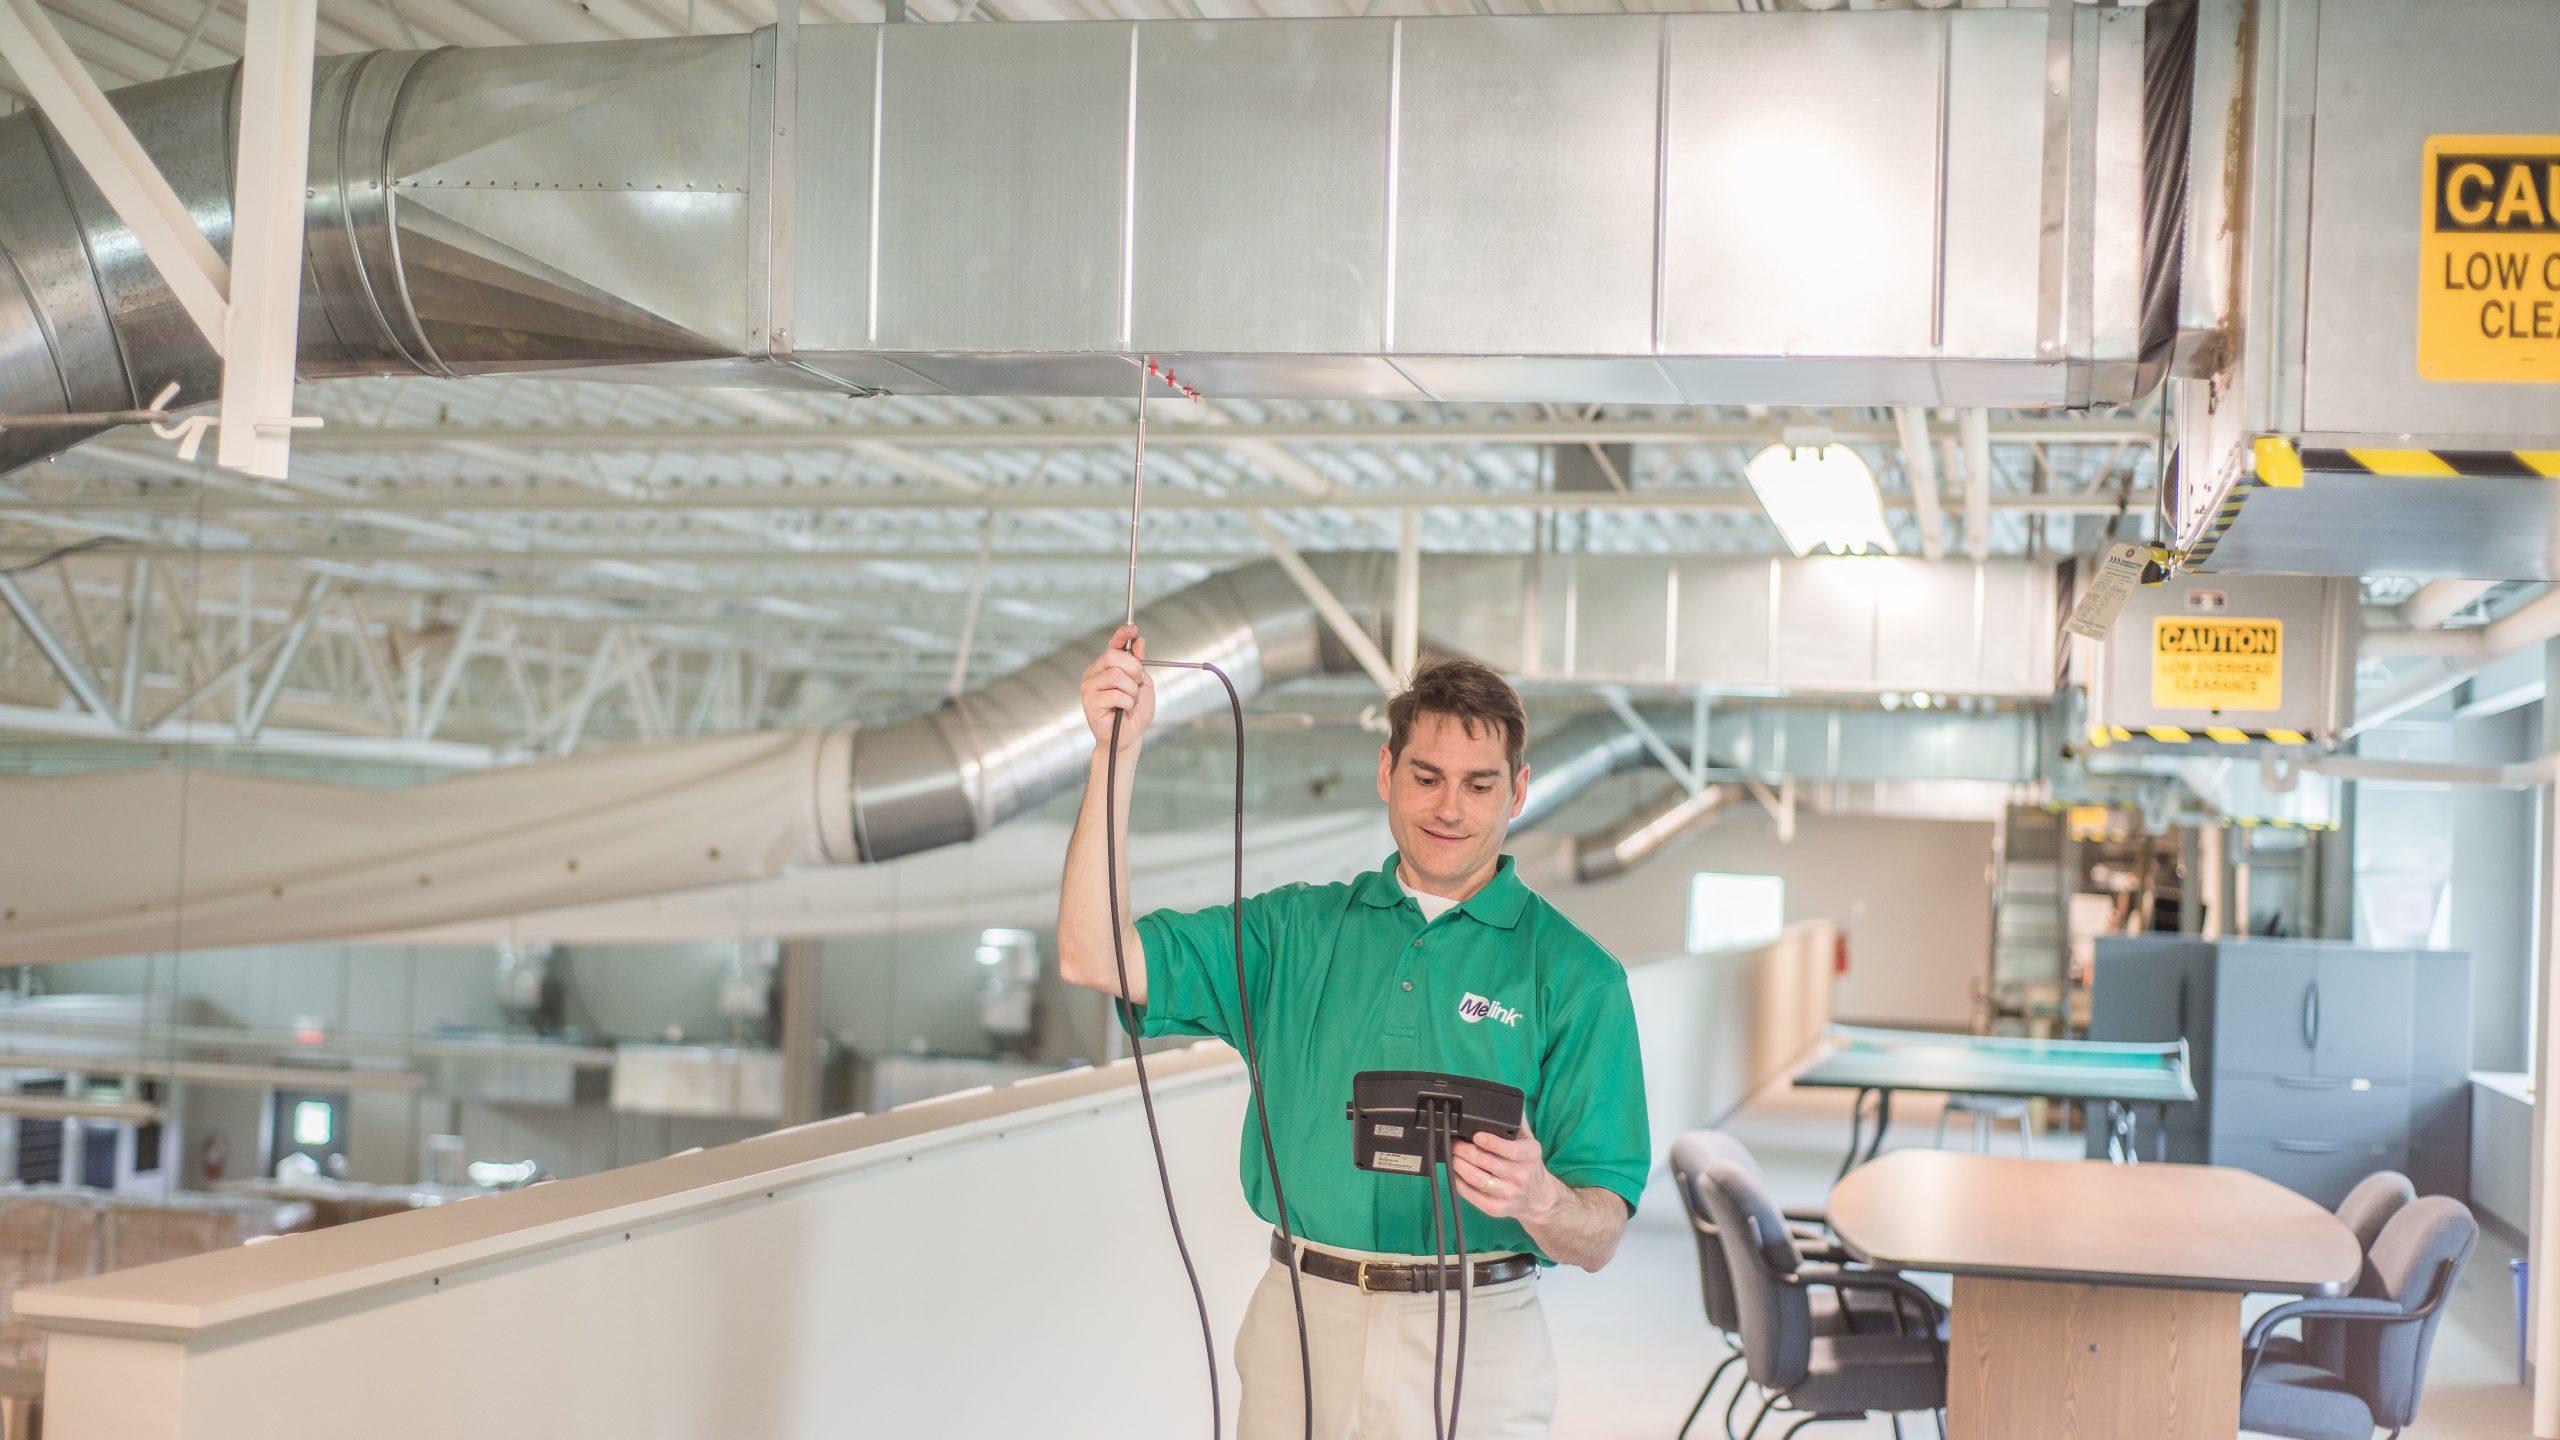 3 Steps to Troubleshooting Your Facility’s HVAC With Onsite Staff